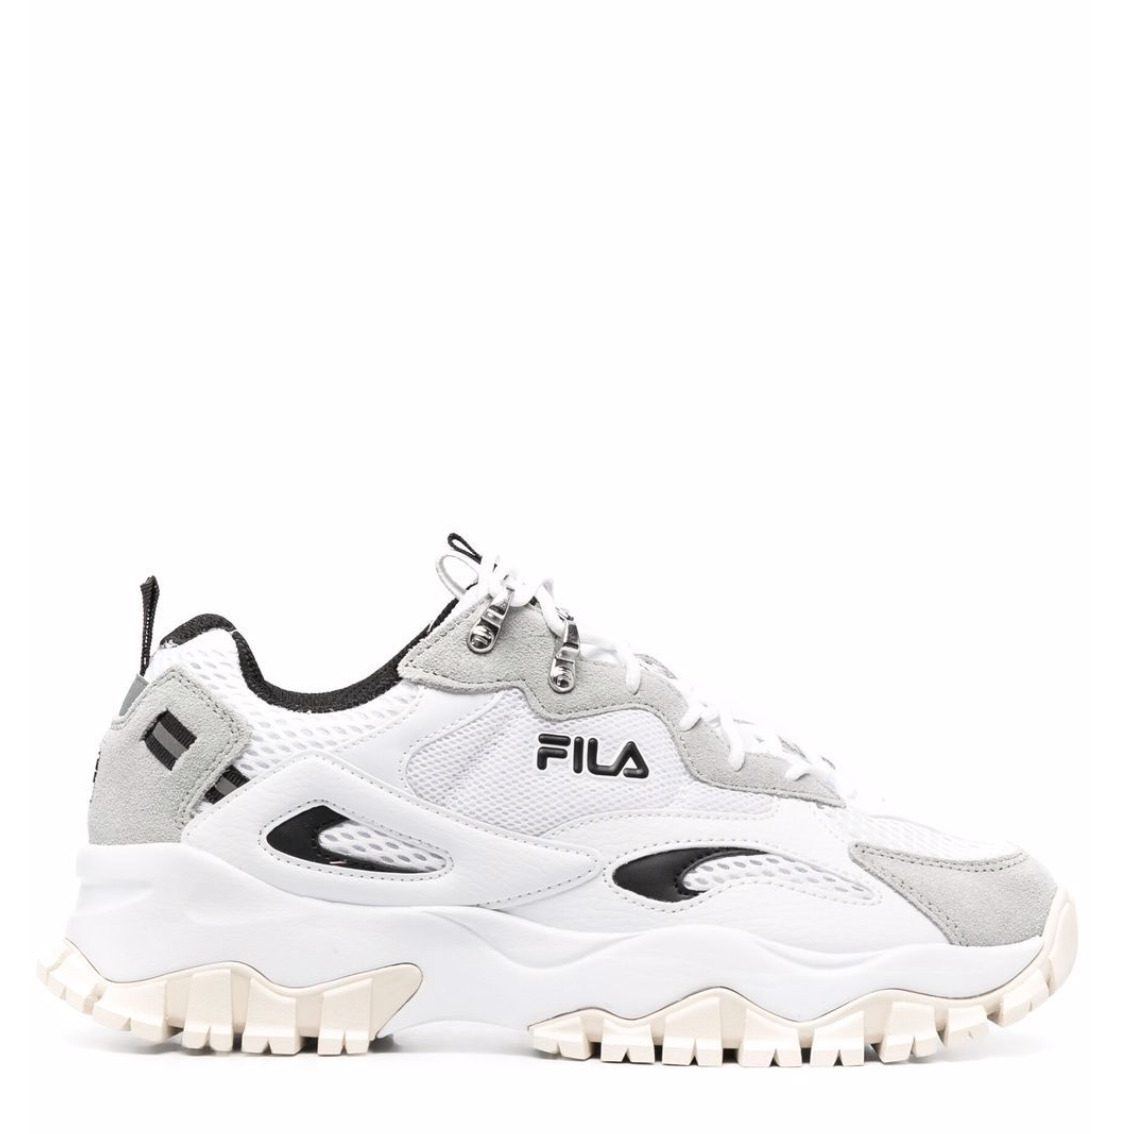 Fila Tracer Tr2 Ανδρικά Chunky Sneakers Λευκά Ffm0058 13036 Skroutzgr